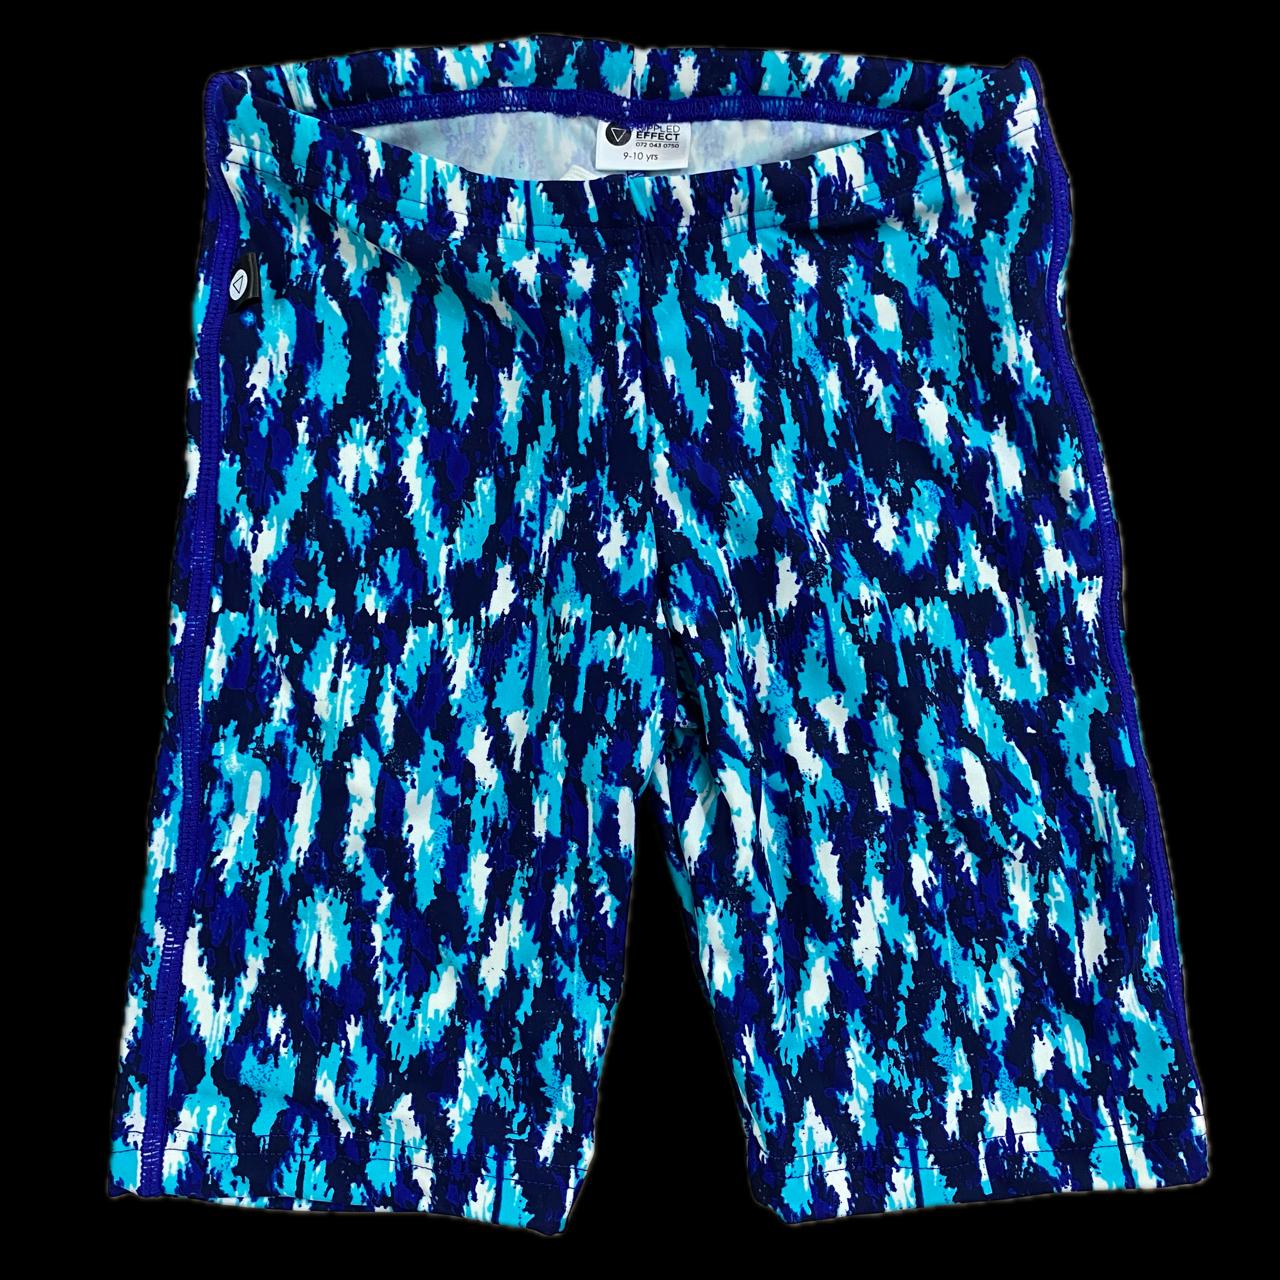 Rippled Effect Boys Jammers - Shades of Blue